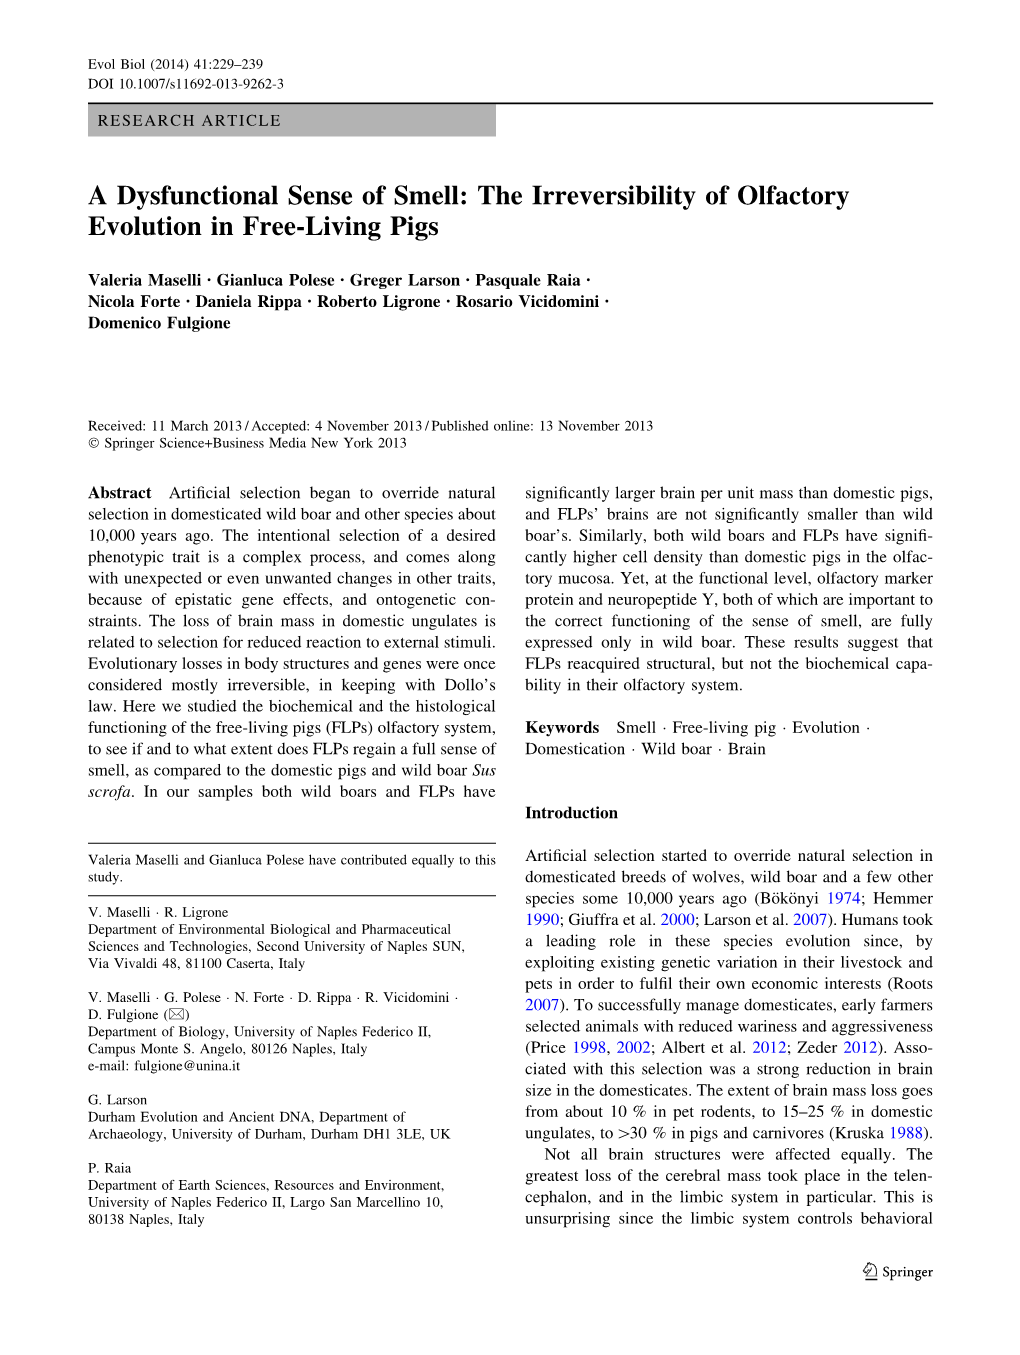 A Dysfunctional Sense of Smell: the Irreversibility of Olfactory Evolution in Free-Living Pigs